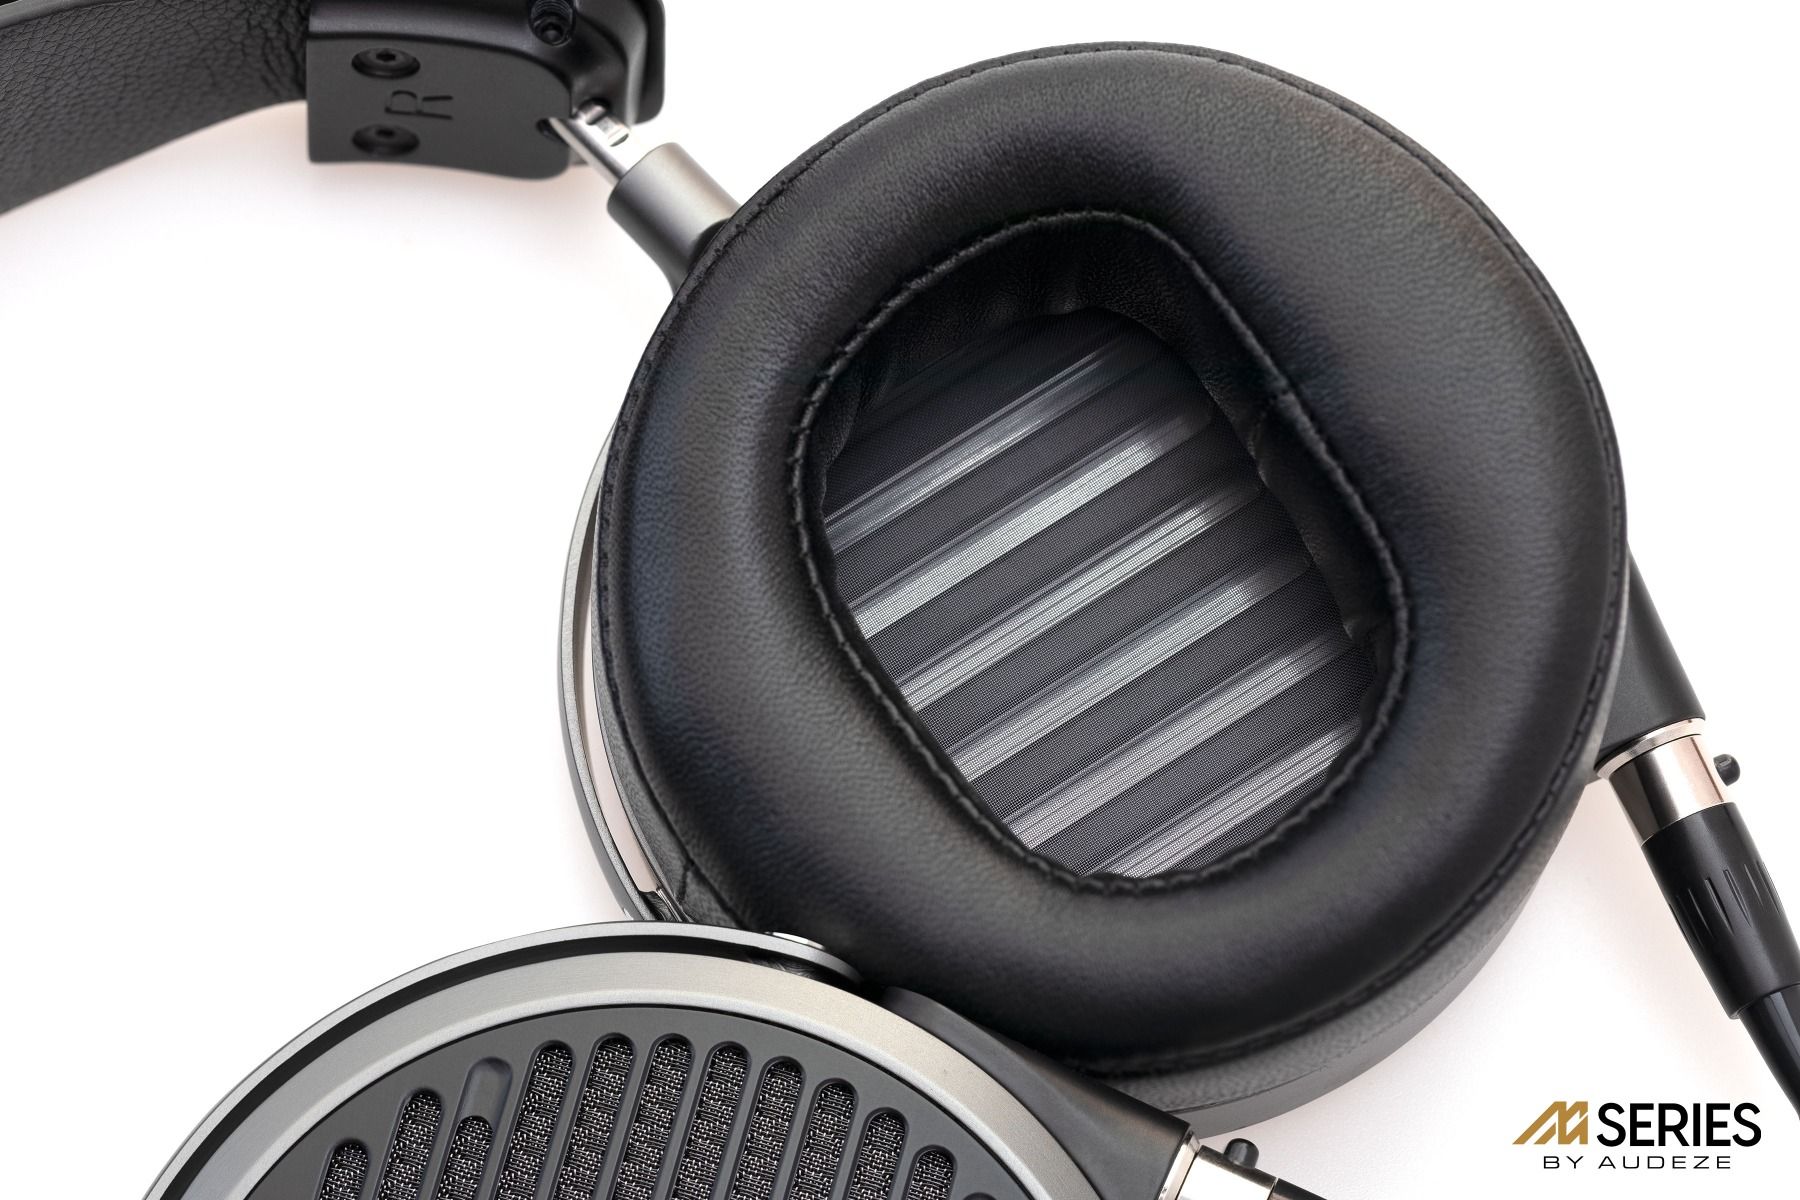 Close-up view of Audeze MM-500 Open-back Planar Magnetic Over-ear headphone's earcup chamber.